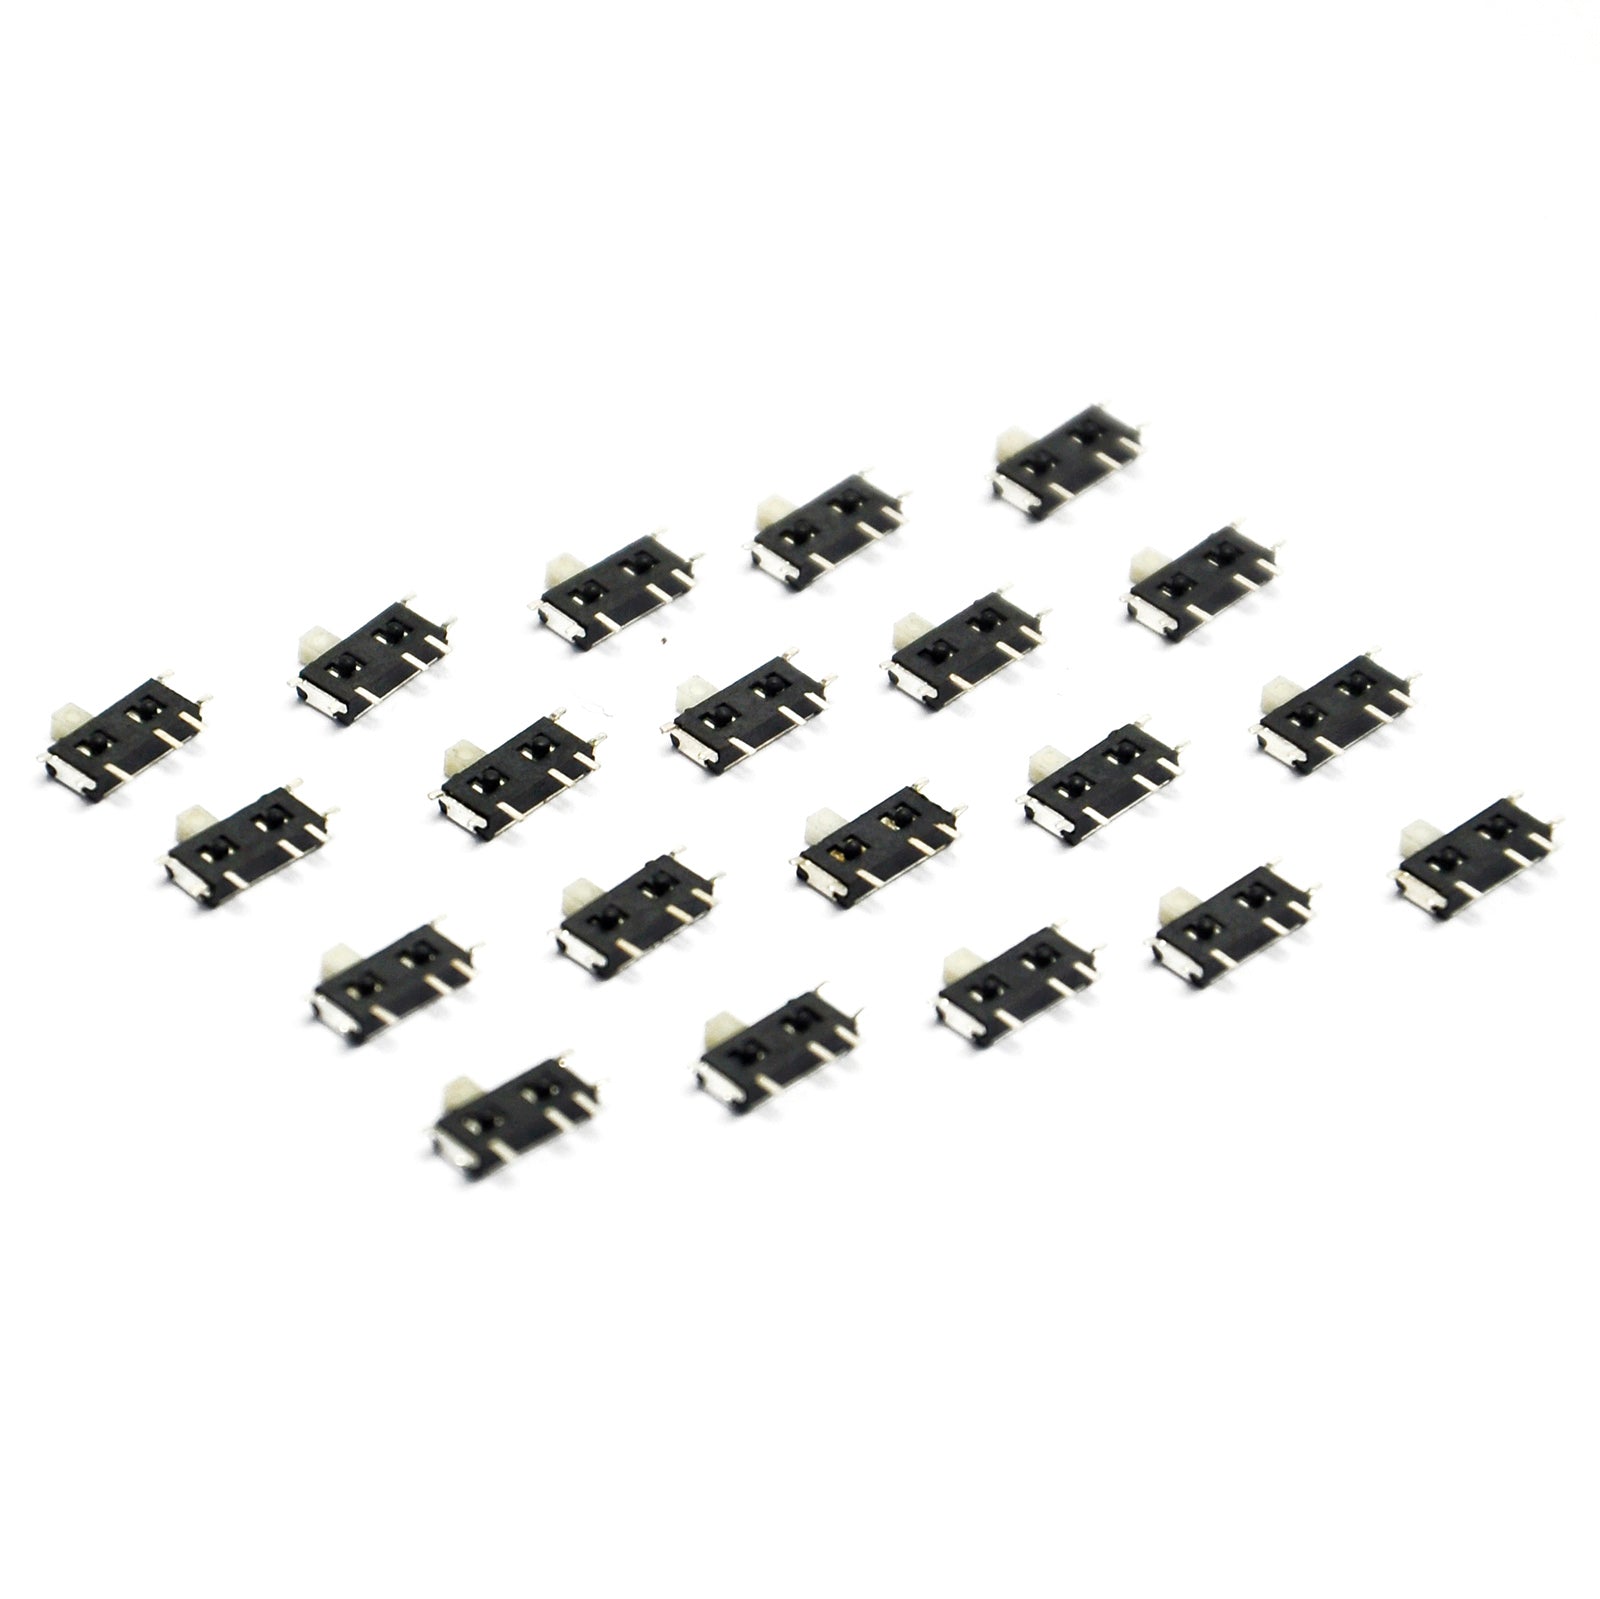 Gikfun Micro Slide Switch Toggle Switch SMD On/Off 7 Pin for Arduino (Pack of 20pcs)